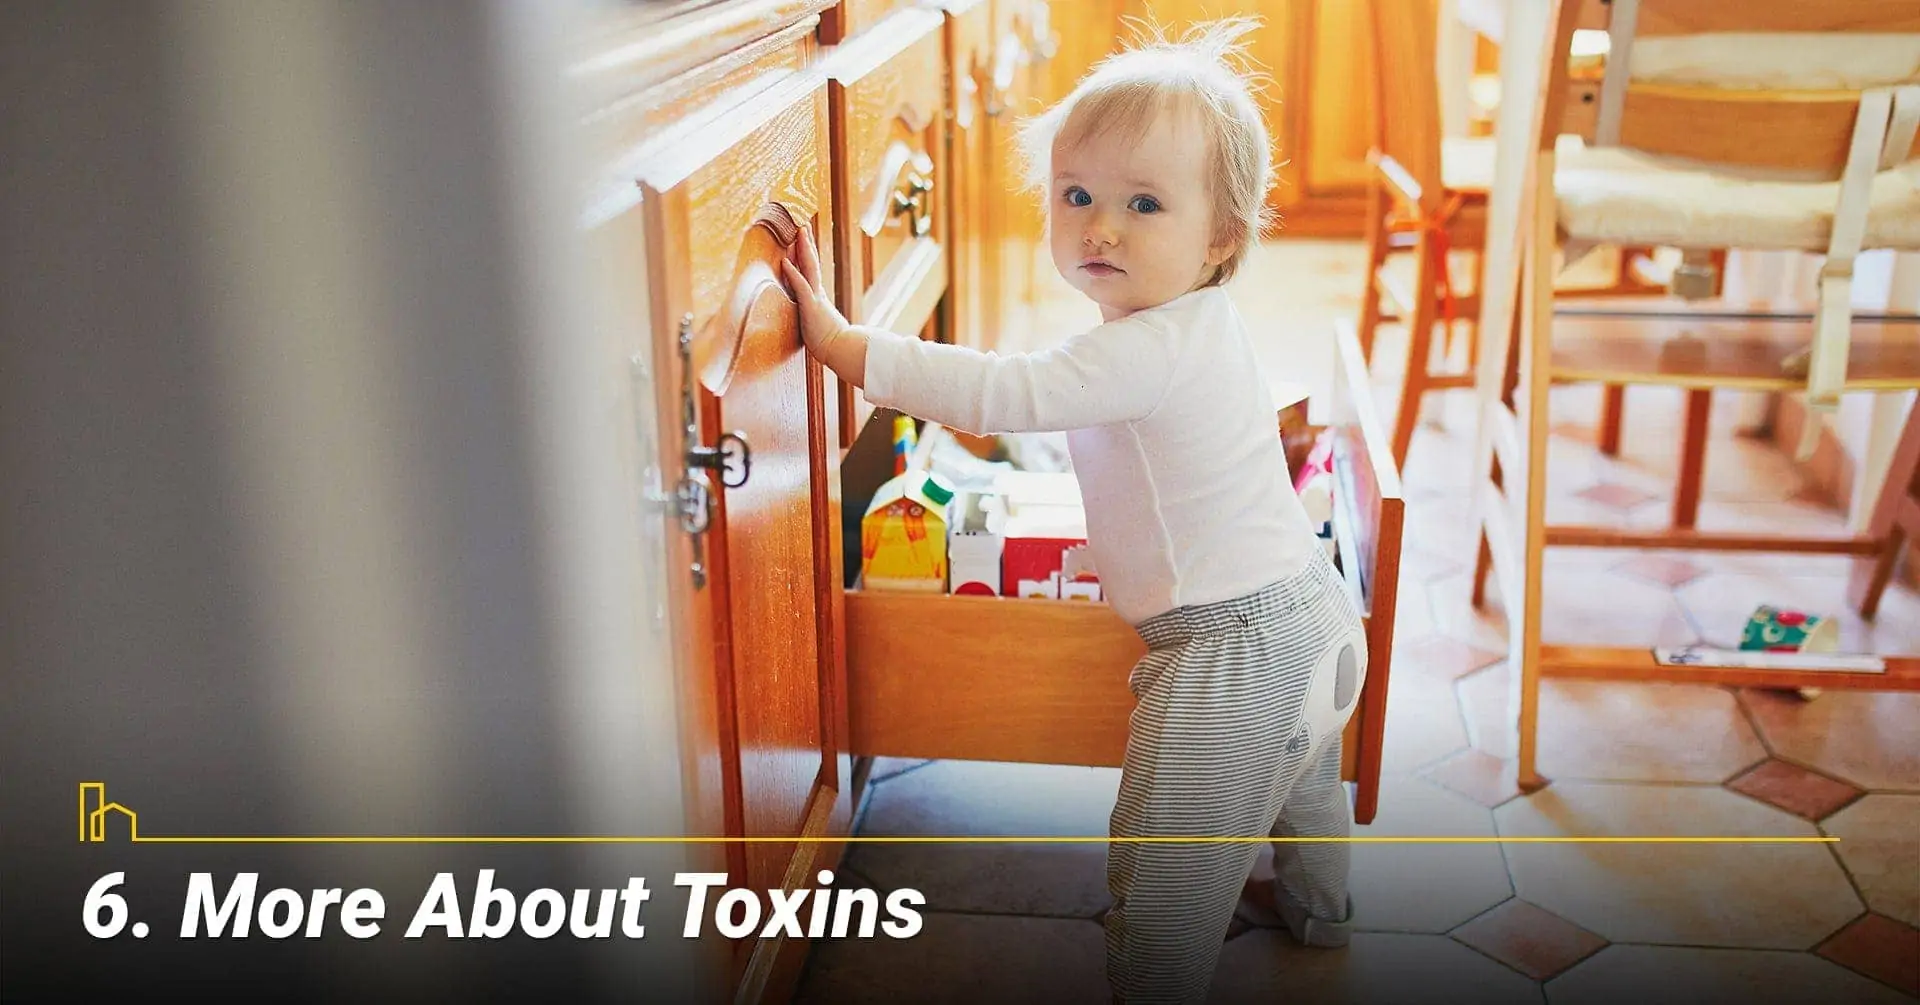 More About Toxins, keep household chemicals out of children reach